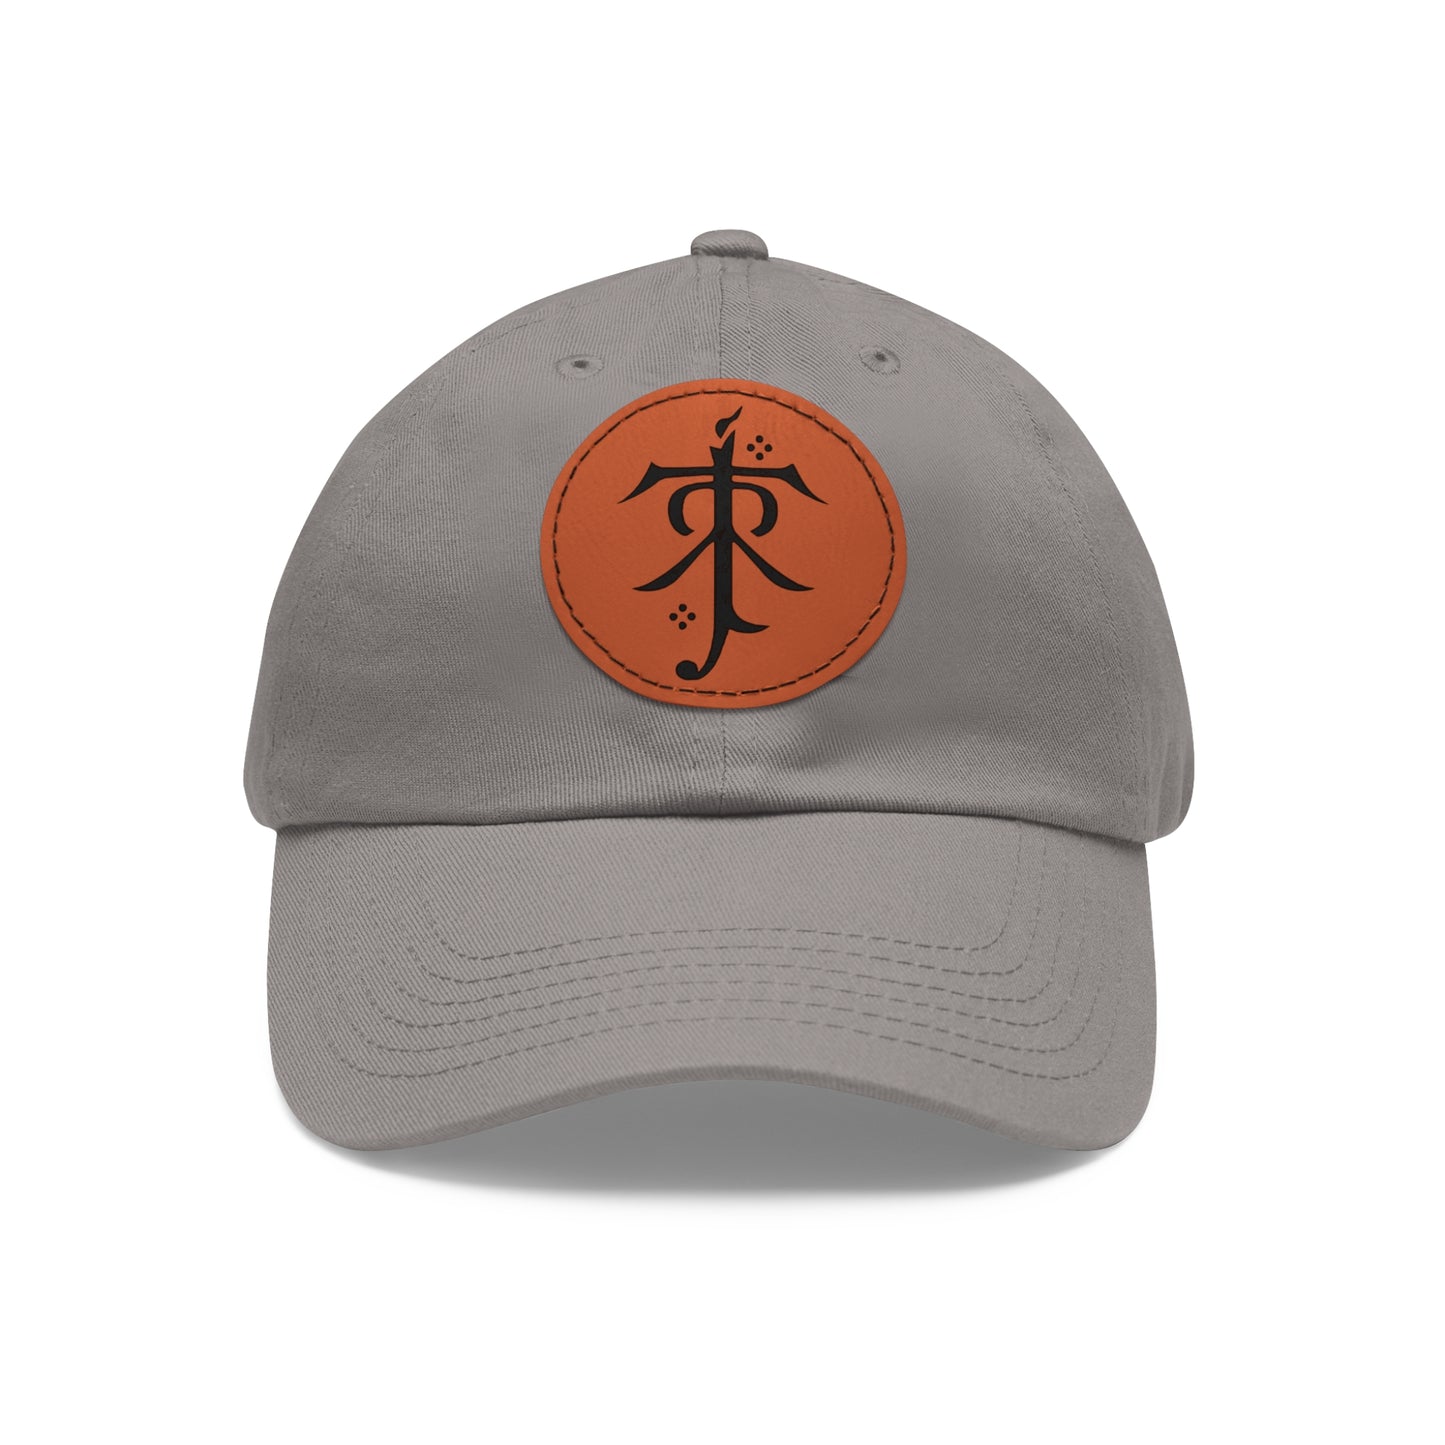 Lord of the Rings Logo Dad Hat with Leather Patch